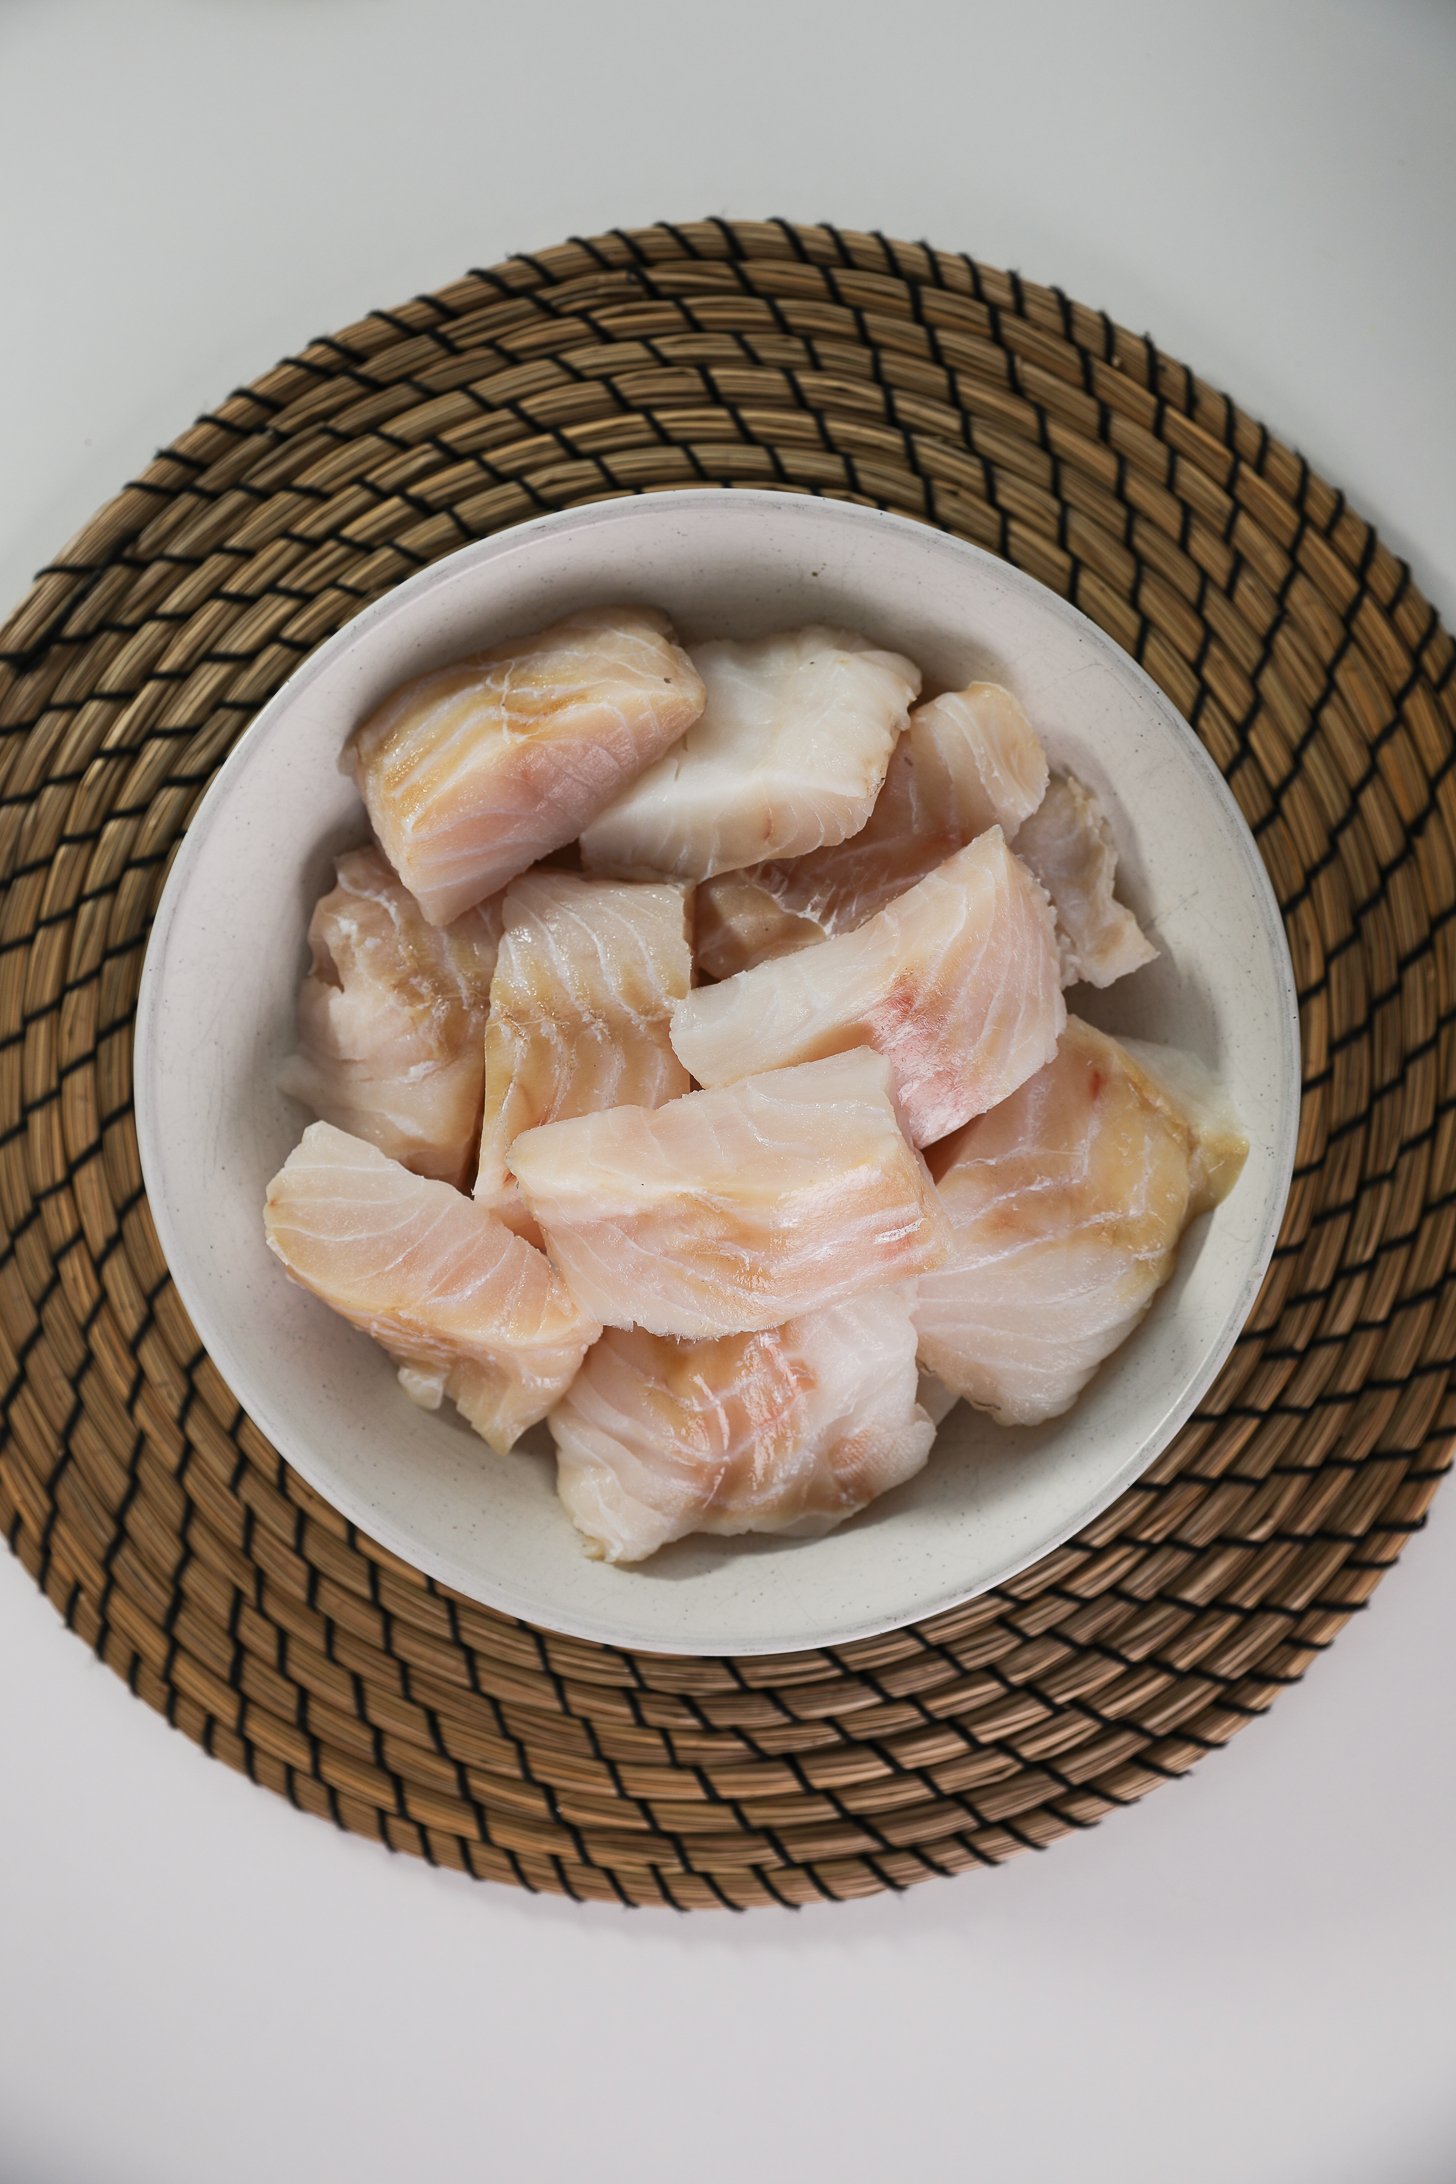 A bowl of medium-sized cod fish fillets placed on a round straw mat.